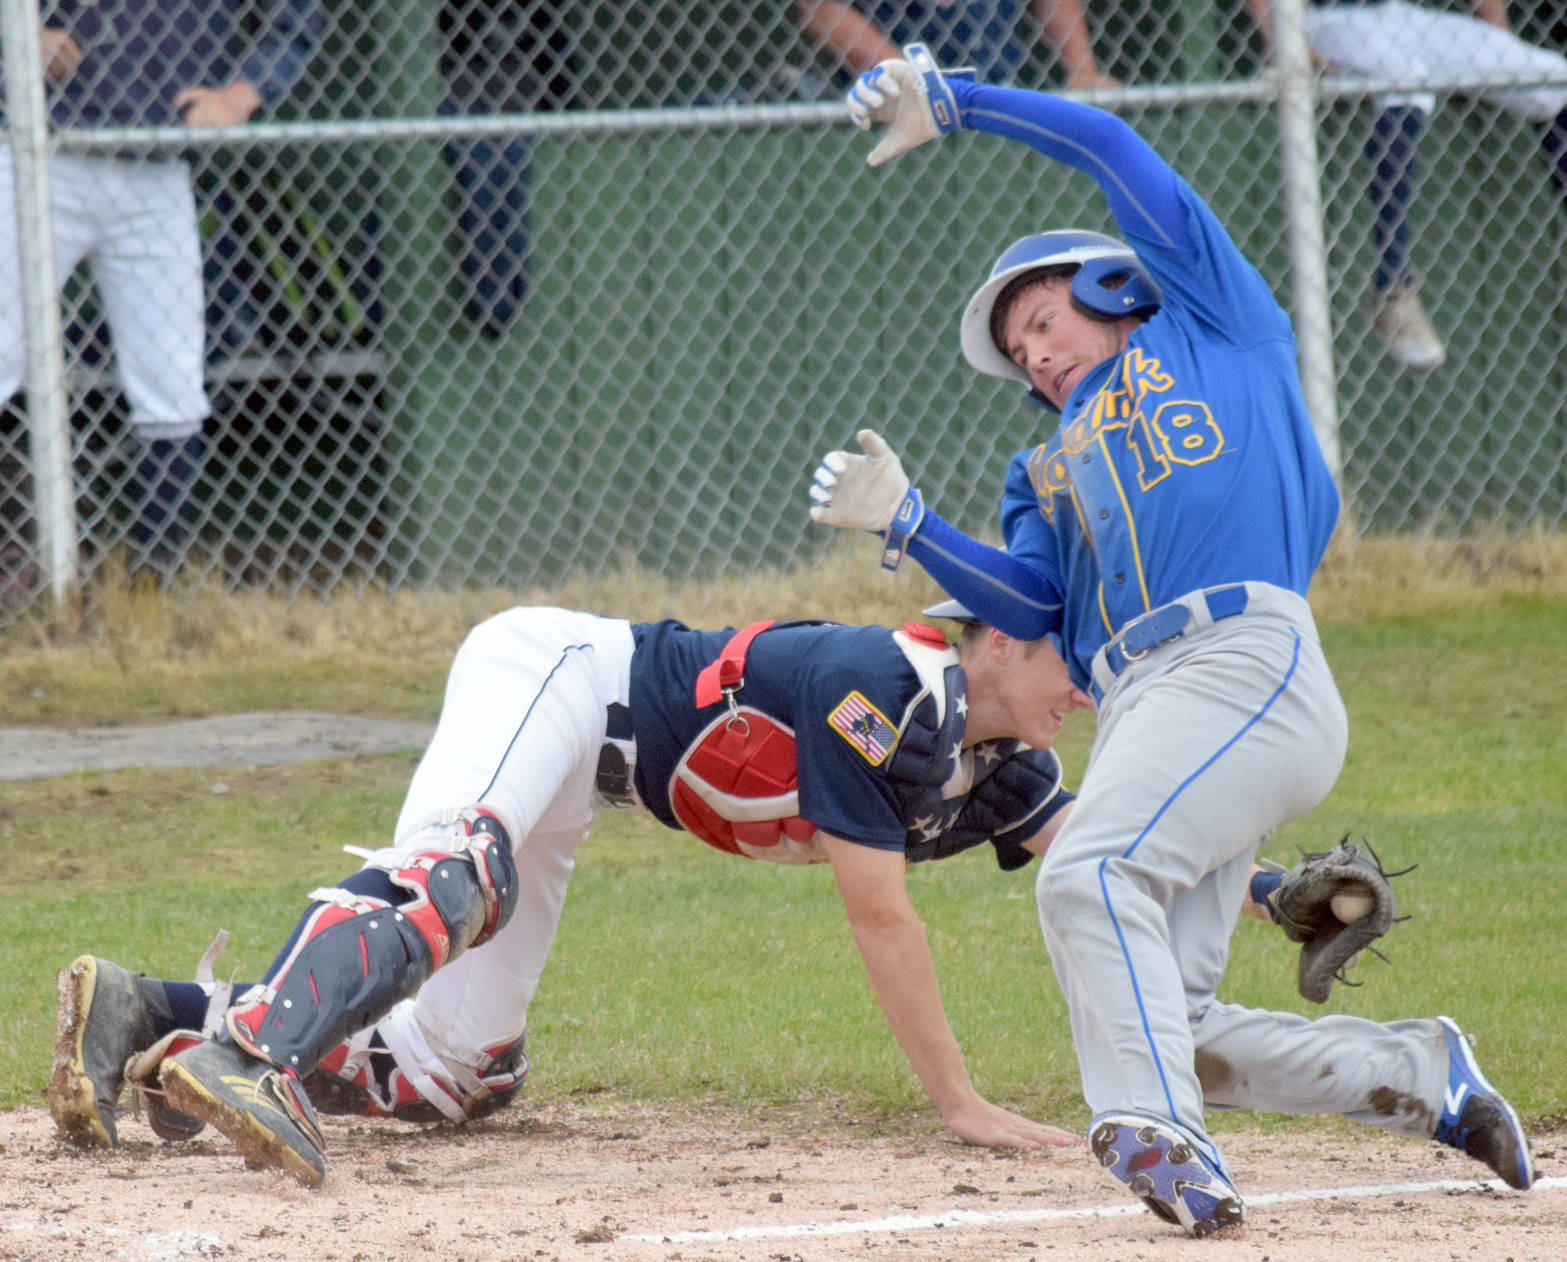 Kodiak’s Anders Hocum avoids the tag of Twins catcher Cody Quelland to score in the fourth inning Saturday, June 16, 2018, at Kenai Little League fields. (Photo by Jeff Helminiak/Peninsula Clarion